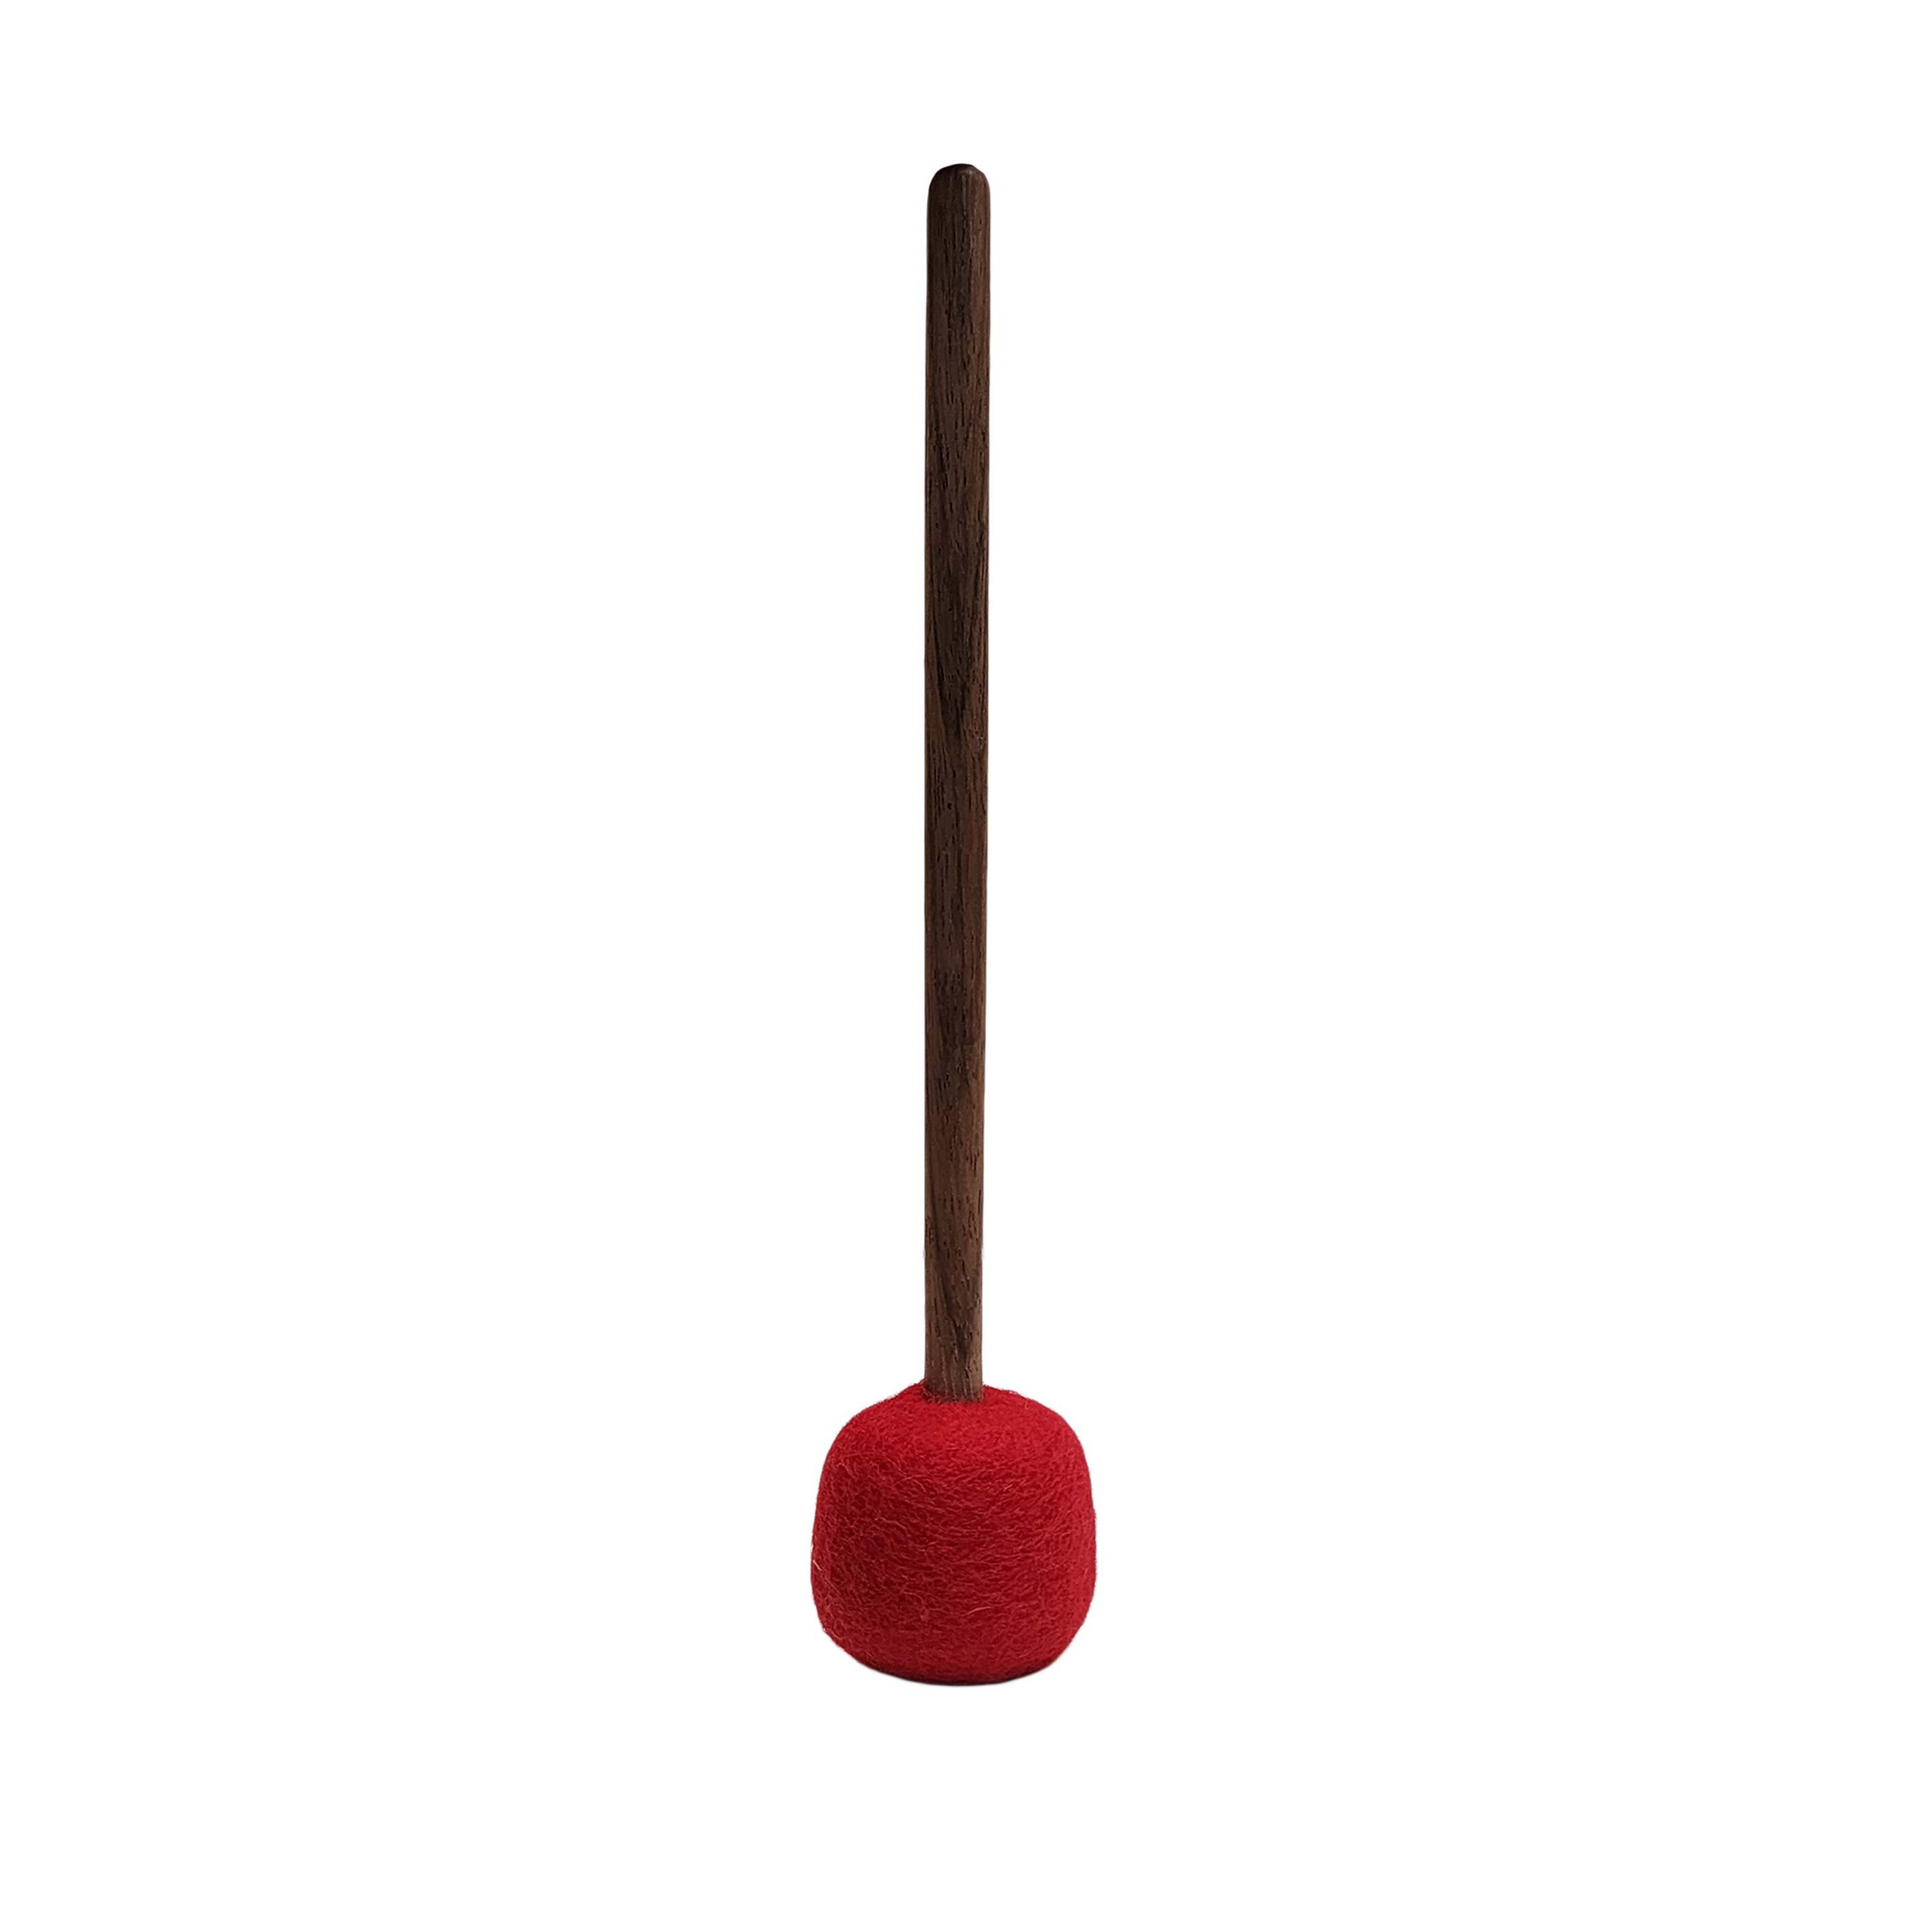 Singing Bowl Accessories, Soft Felt Beating Mallet, Extra Small